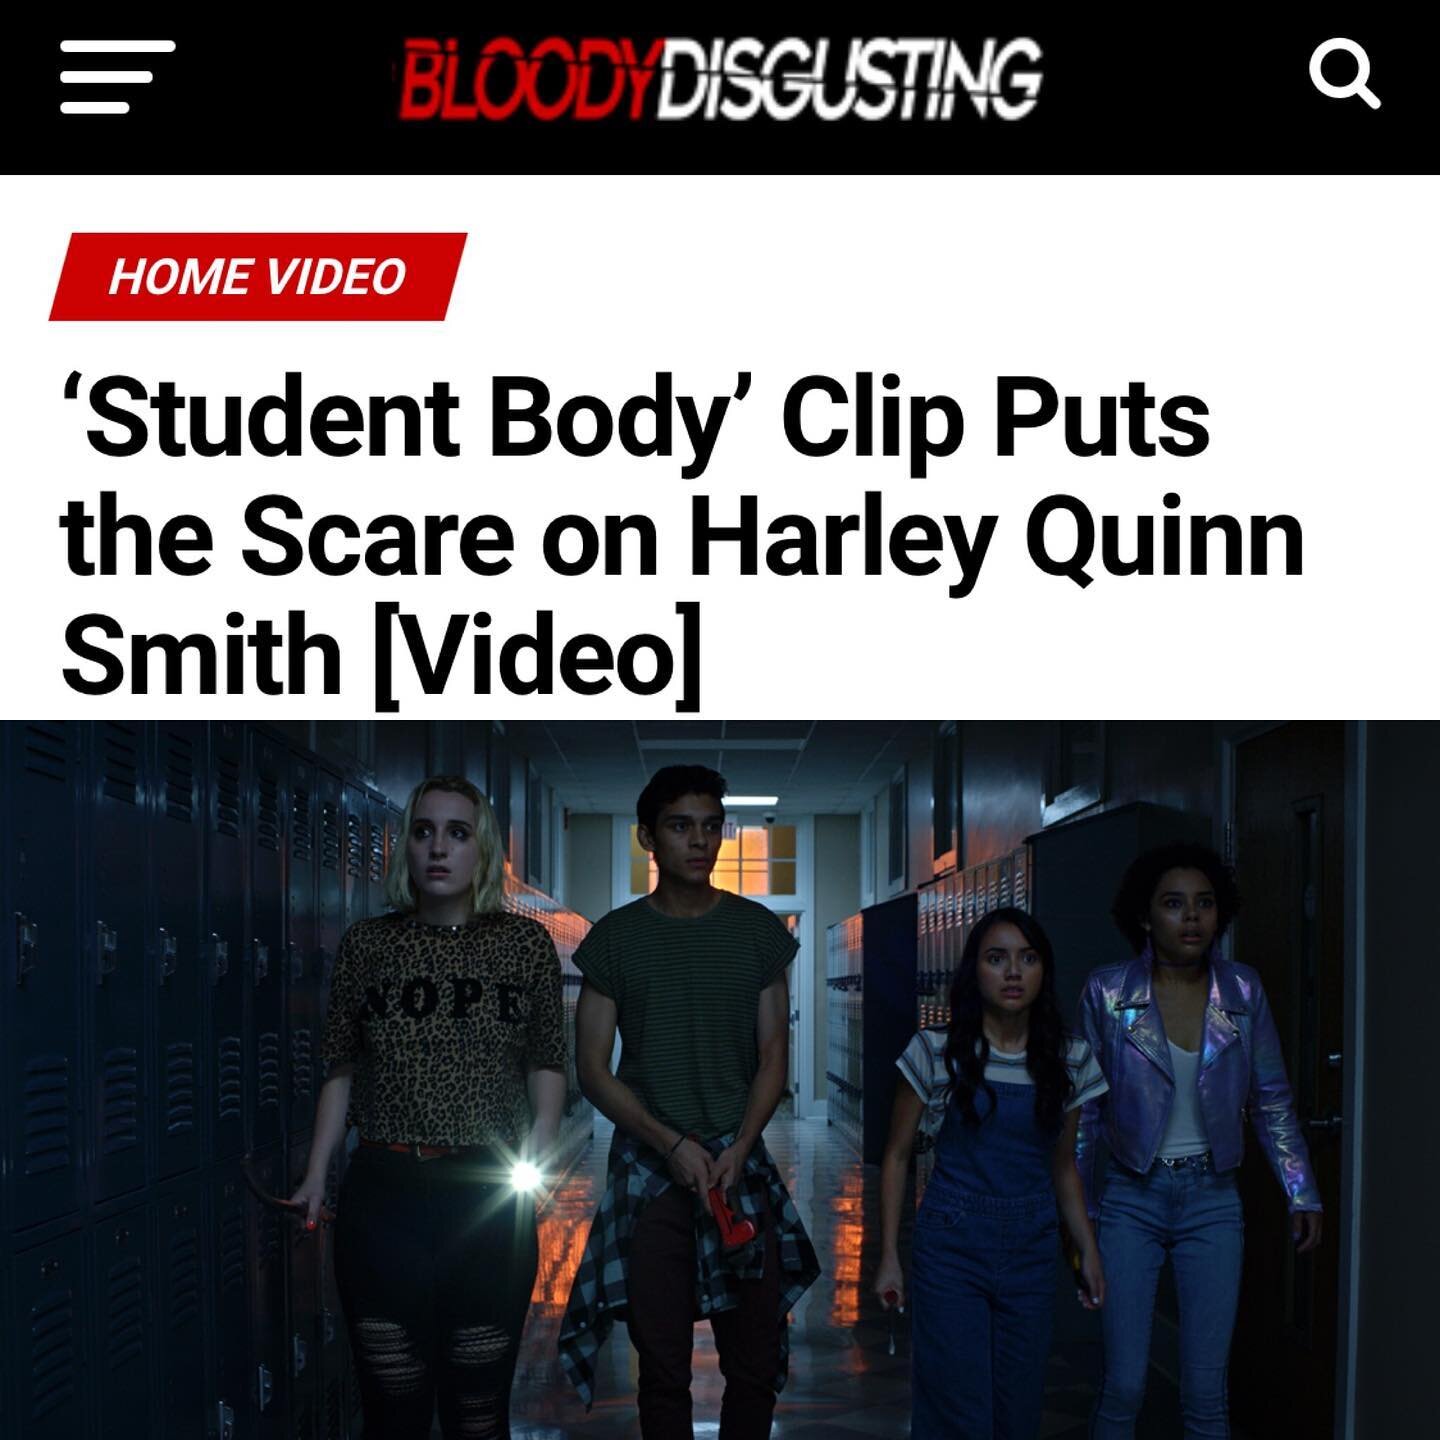 Another KILLER milestone for Student Body! Thank you @bdisgusting for featuring us!